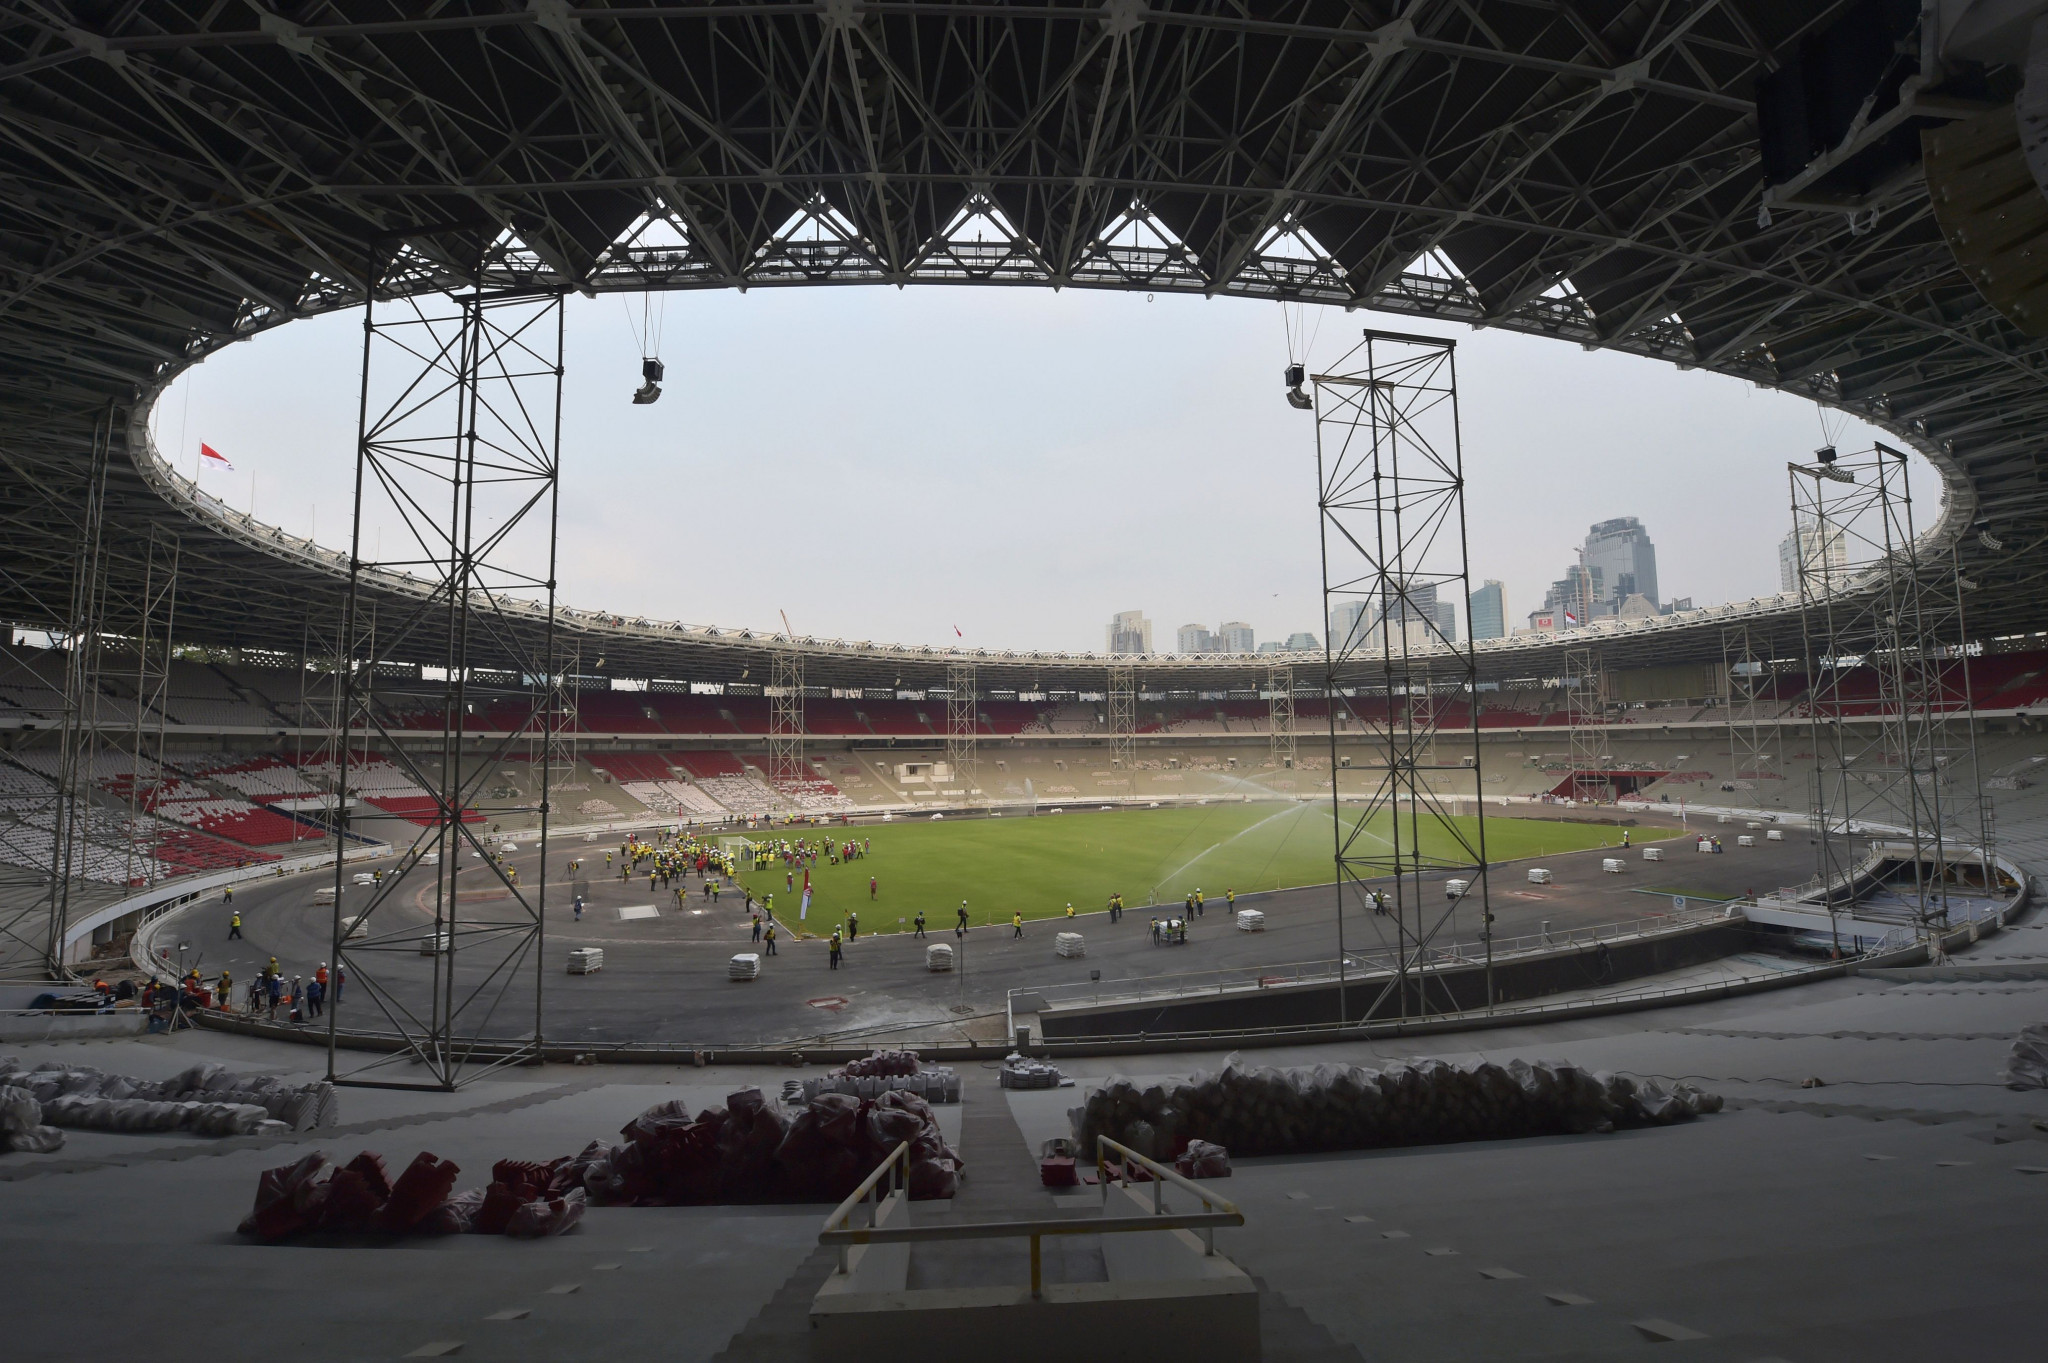 Renovation work completed at main Asian Games stadium in Jakarta